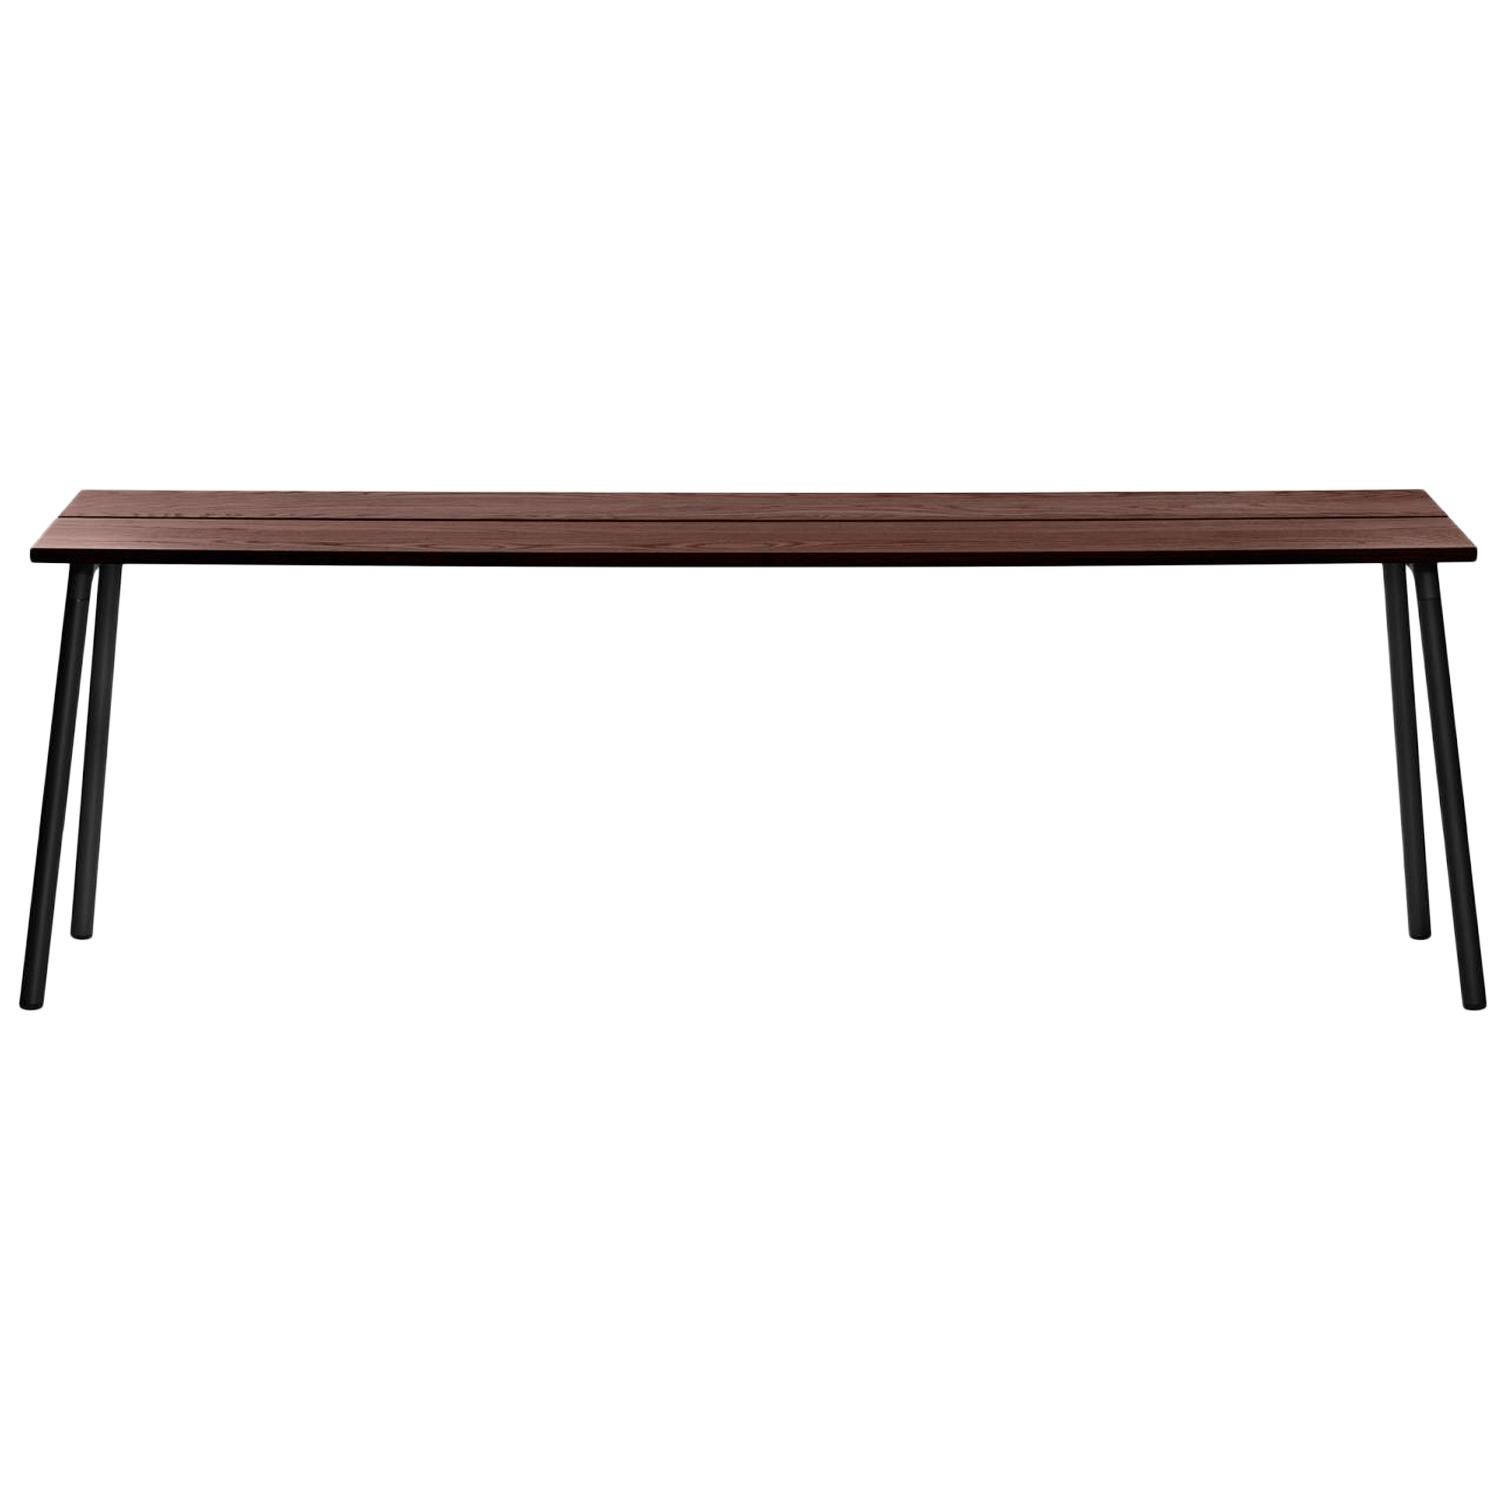 Emeco Run Large Side Table in Dark Powder-Coat & Walnut by Sam Hecht + Kim Colin For Sale